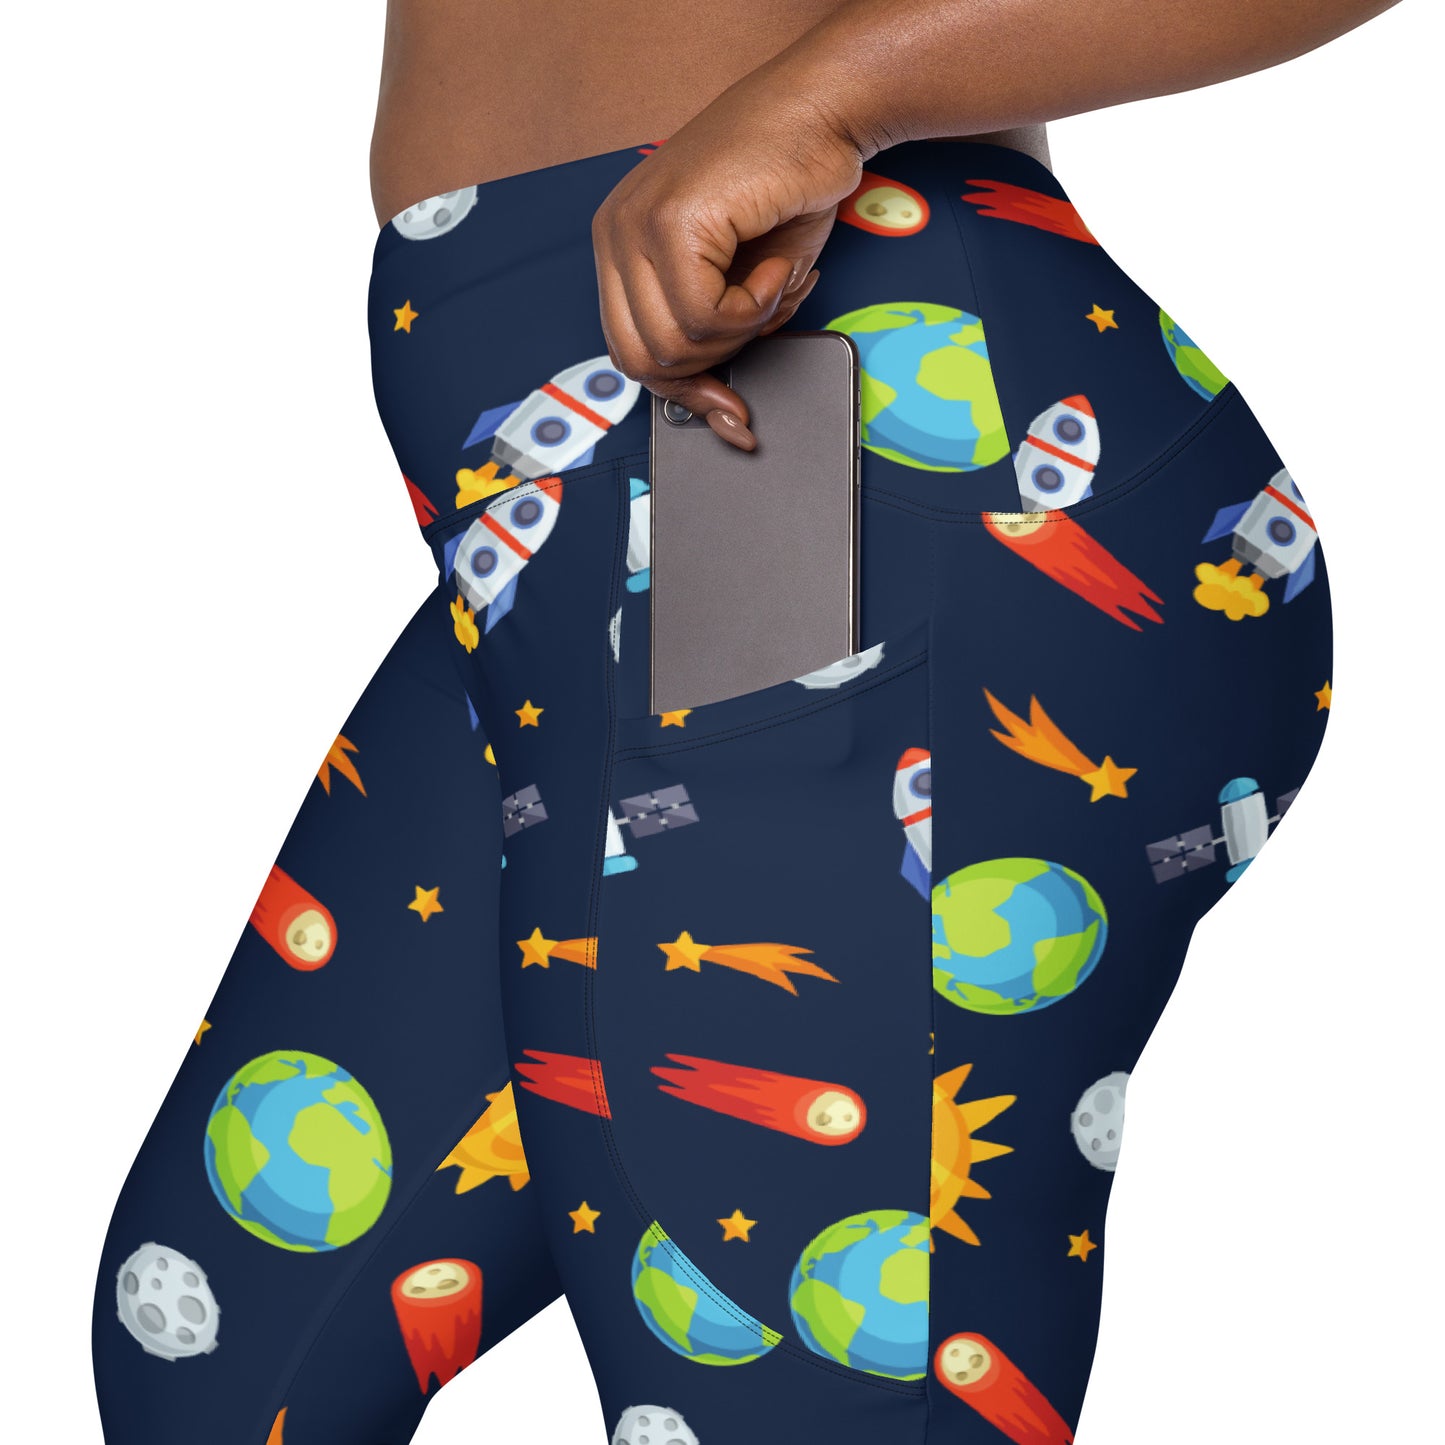 Busy Space - Leggings with pockets, 2XS - 6XL Leggings With Pockets 2XS - 6XL (US)